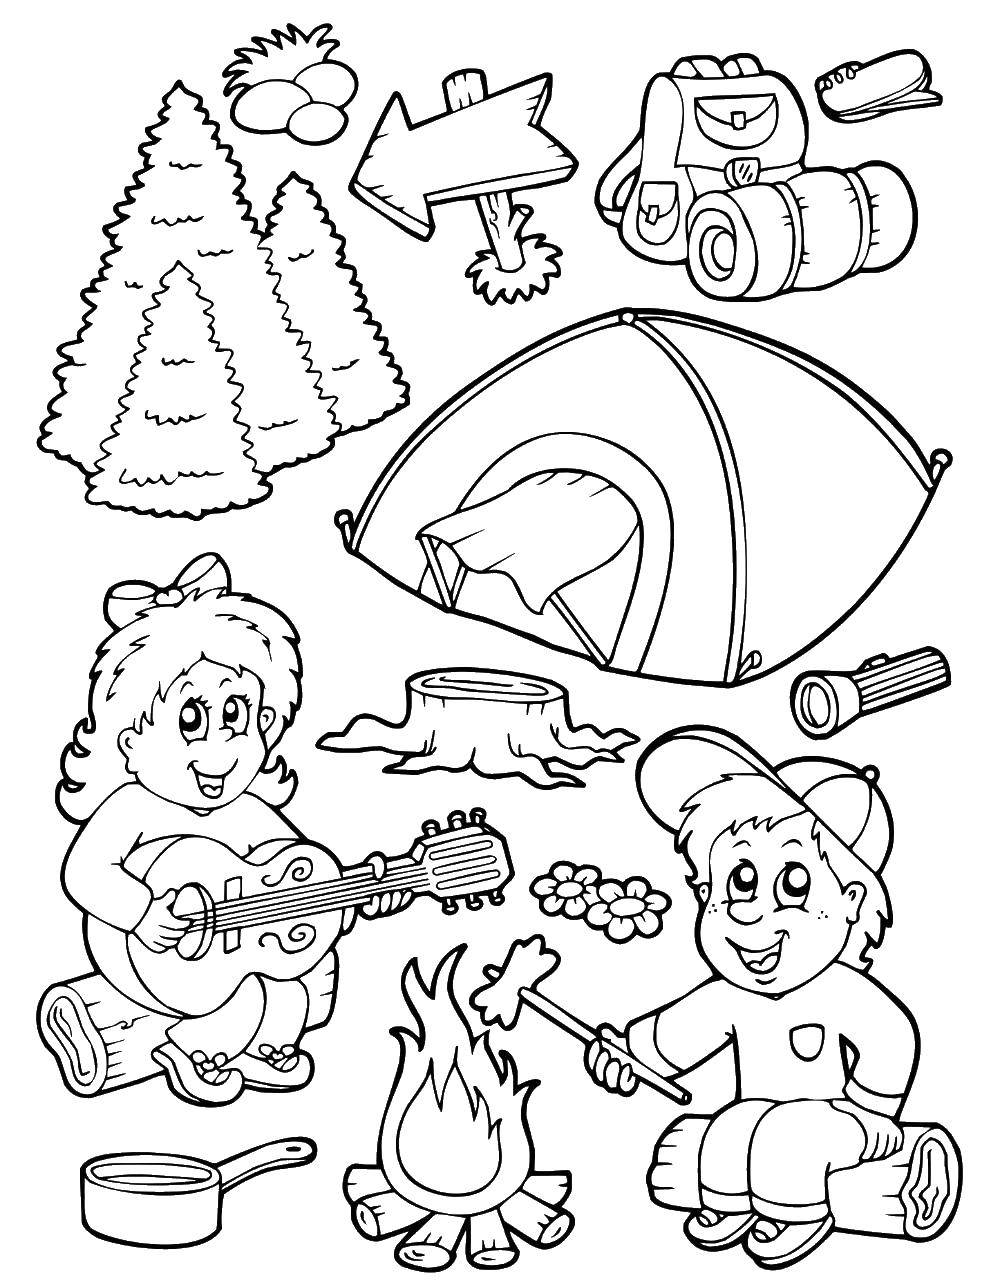 Coloring Children on holiday. Category Camping. Tags:  children, tent, campfire, sleeping bag.